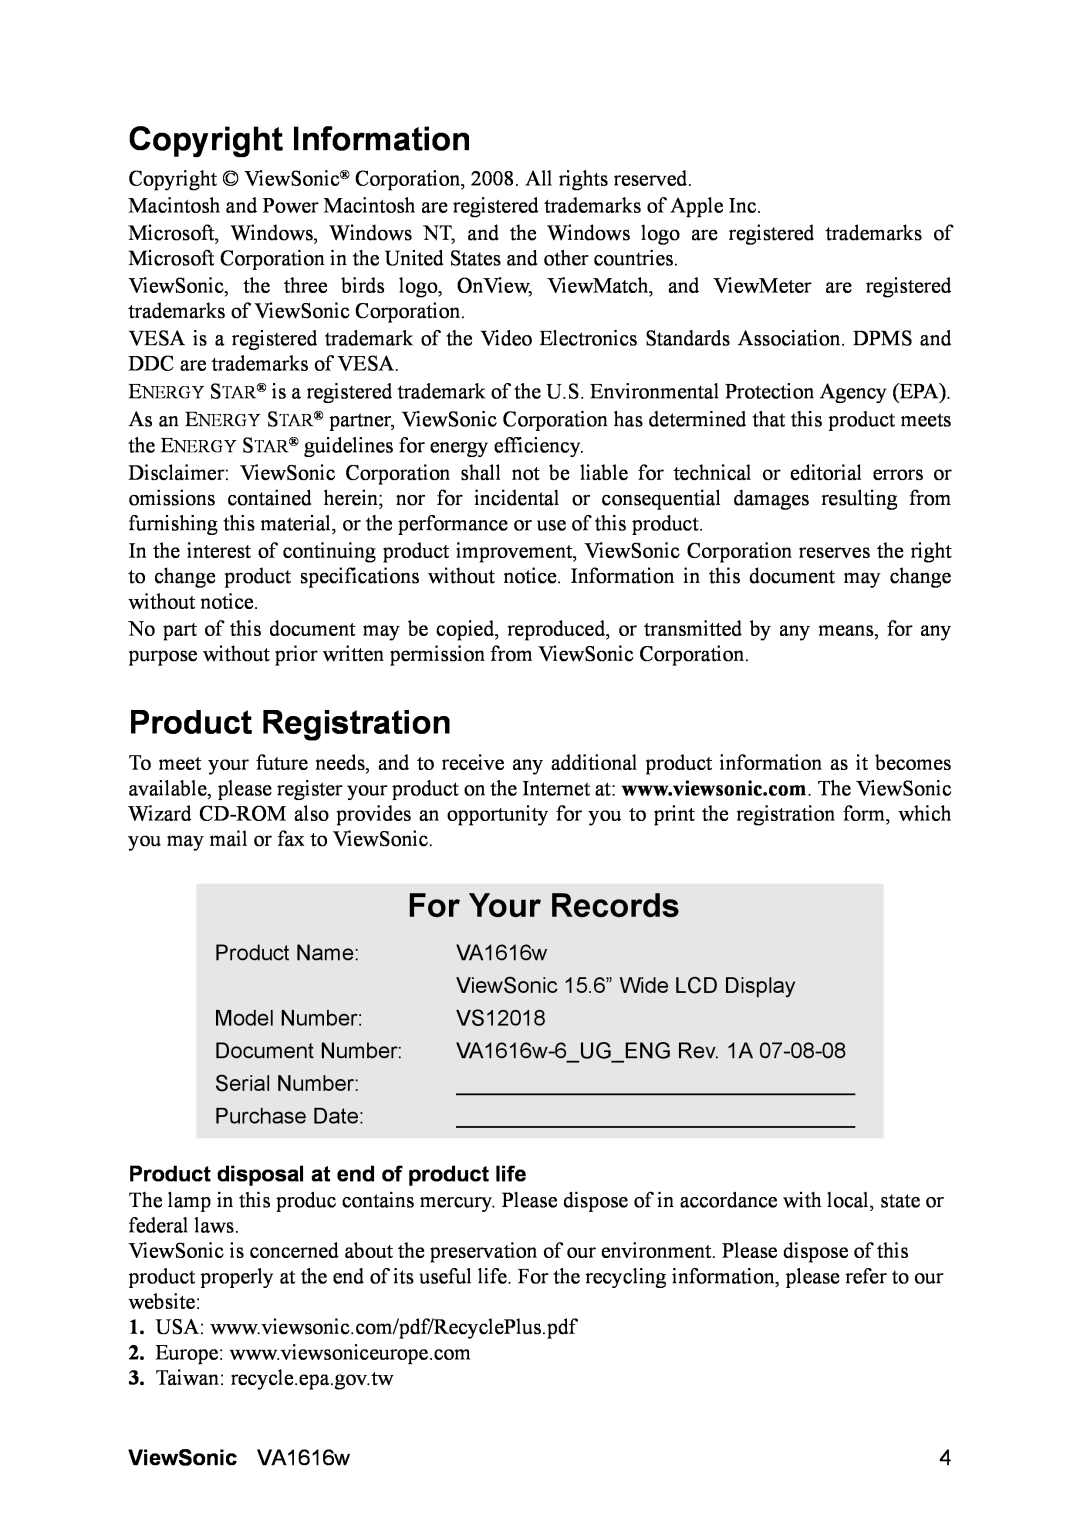 ViewSonic VA1616W Copyright Information, Product Registration, For Your Records, Product disposal at end of product life 